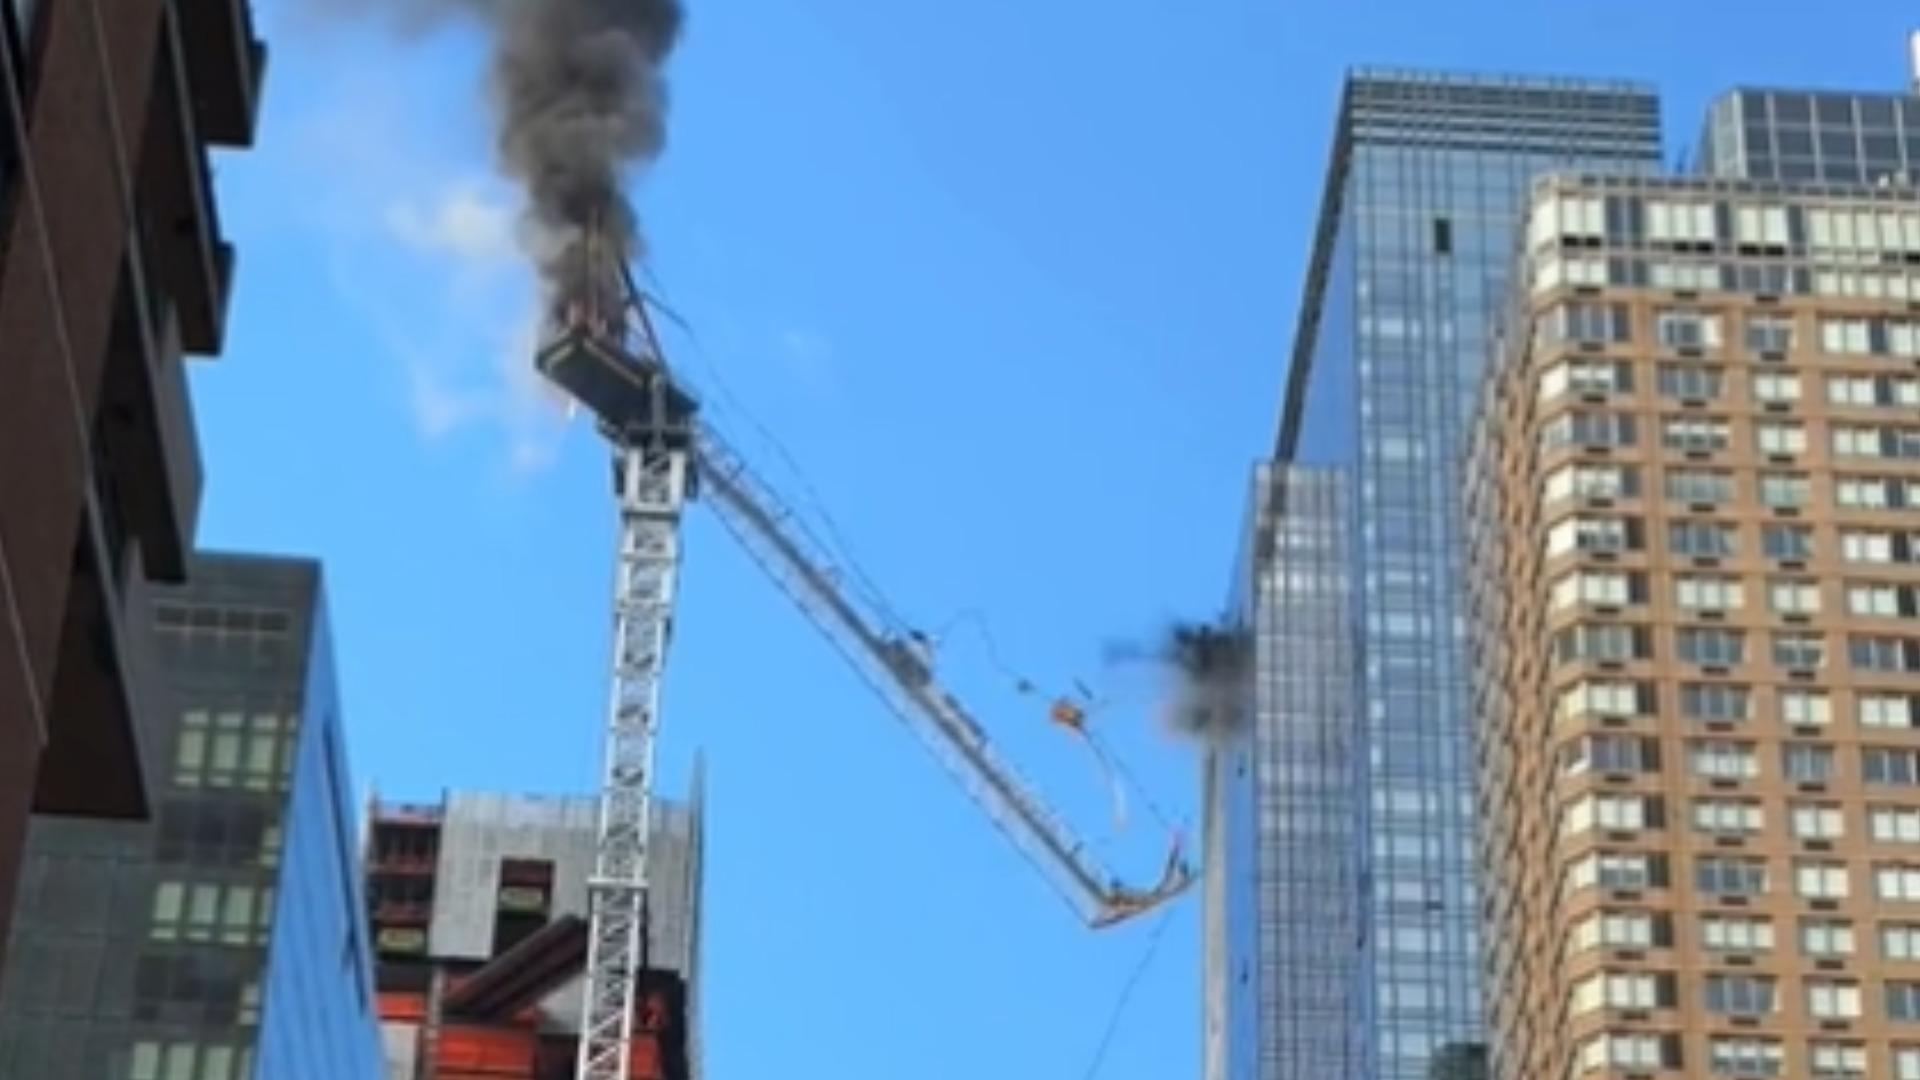 Crane Bursts Into Flames, Partially Collapses and Injures Two In Hell’s Kitchen, New York [VIDEO]